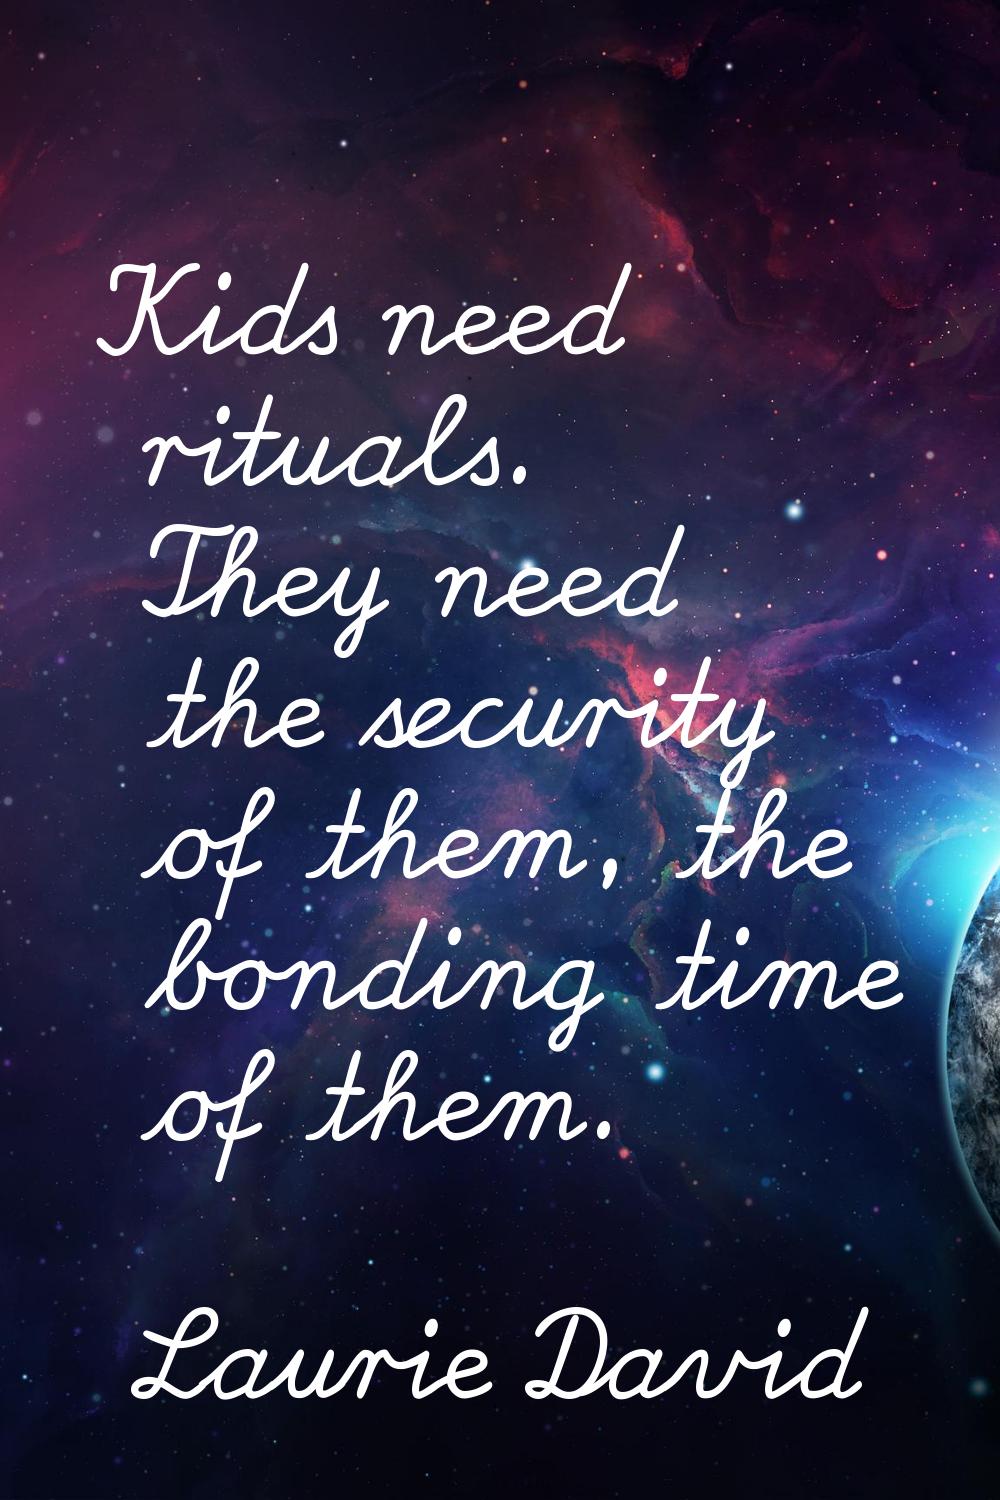 Kids need rituals. They need the security of them, the bonding time of them.